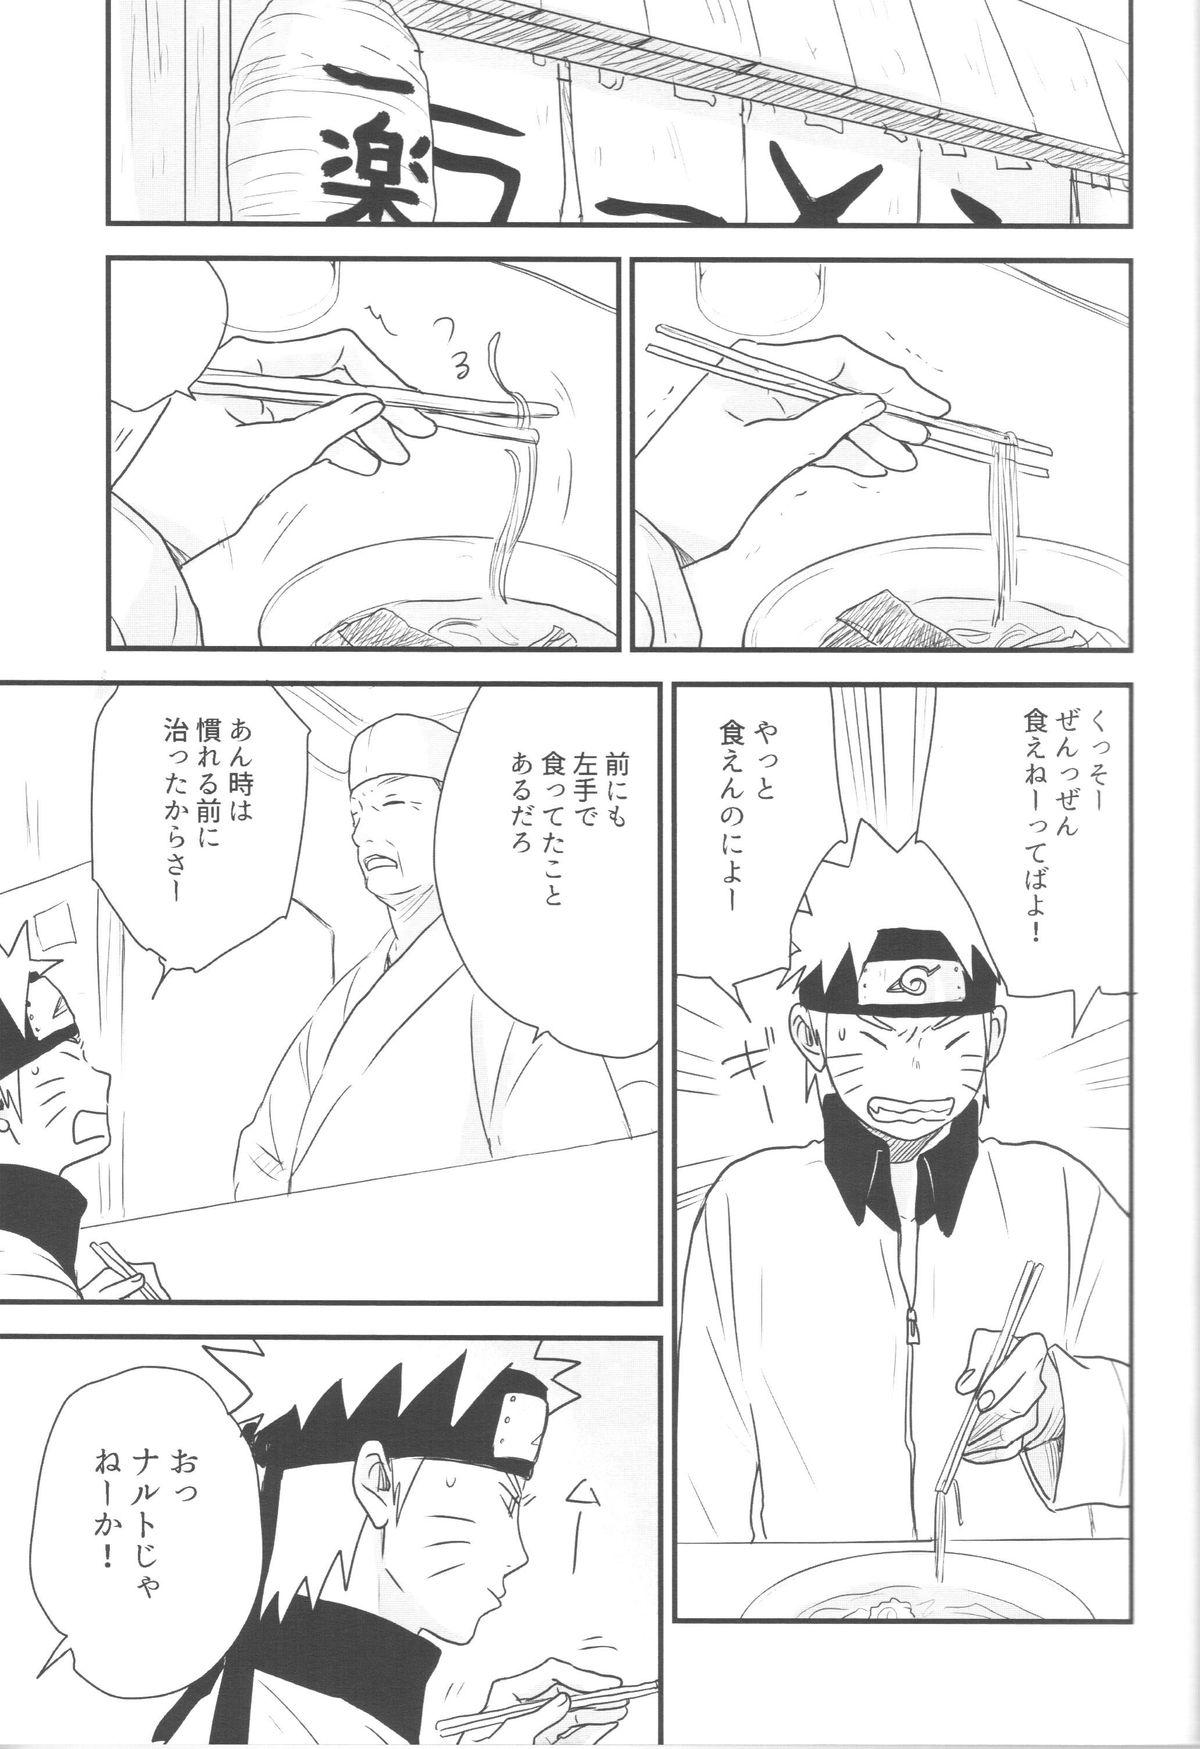 Fuck Porn A Sweet Nightmare - Naruto Friend - Page 7